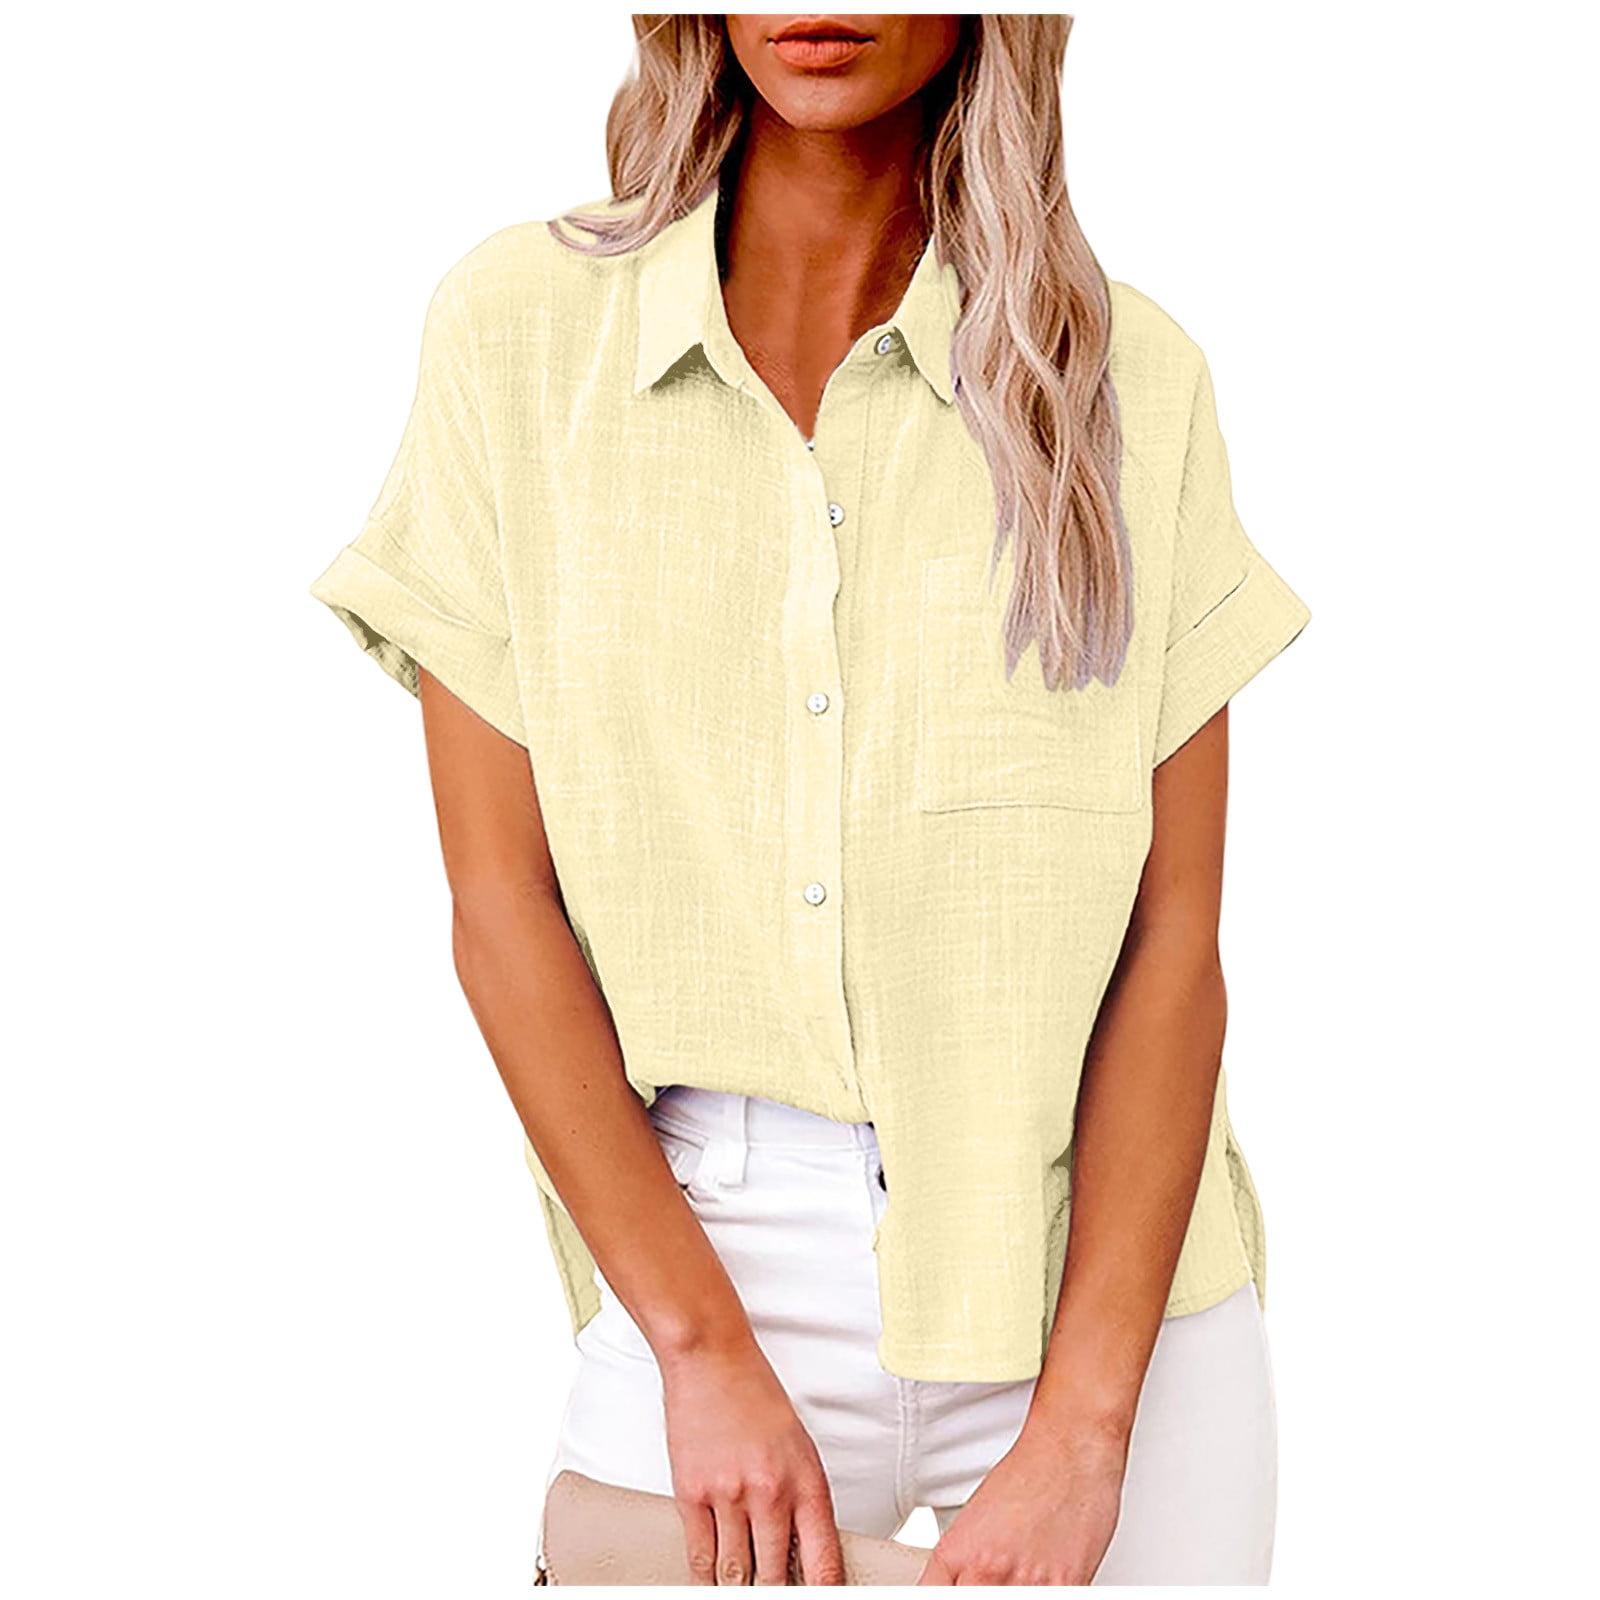 Ichuanyi Womens Cotton Button Down Shirt Casual Short Sleeve Loose Fit ...